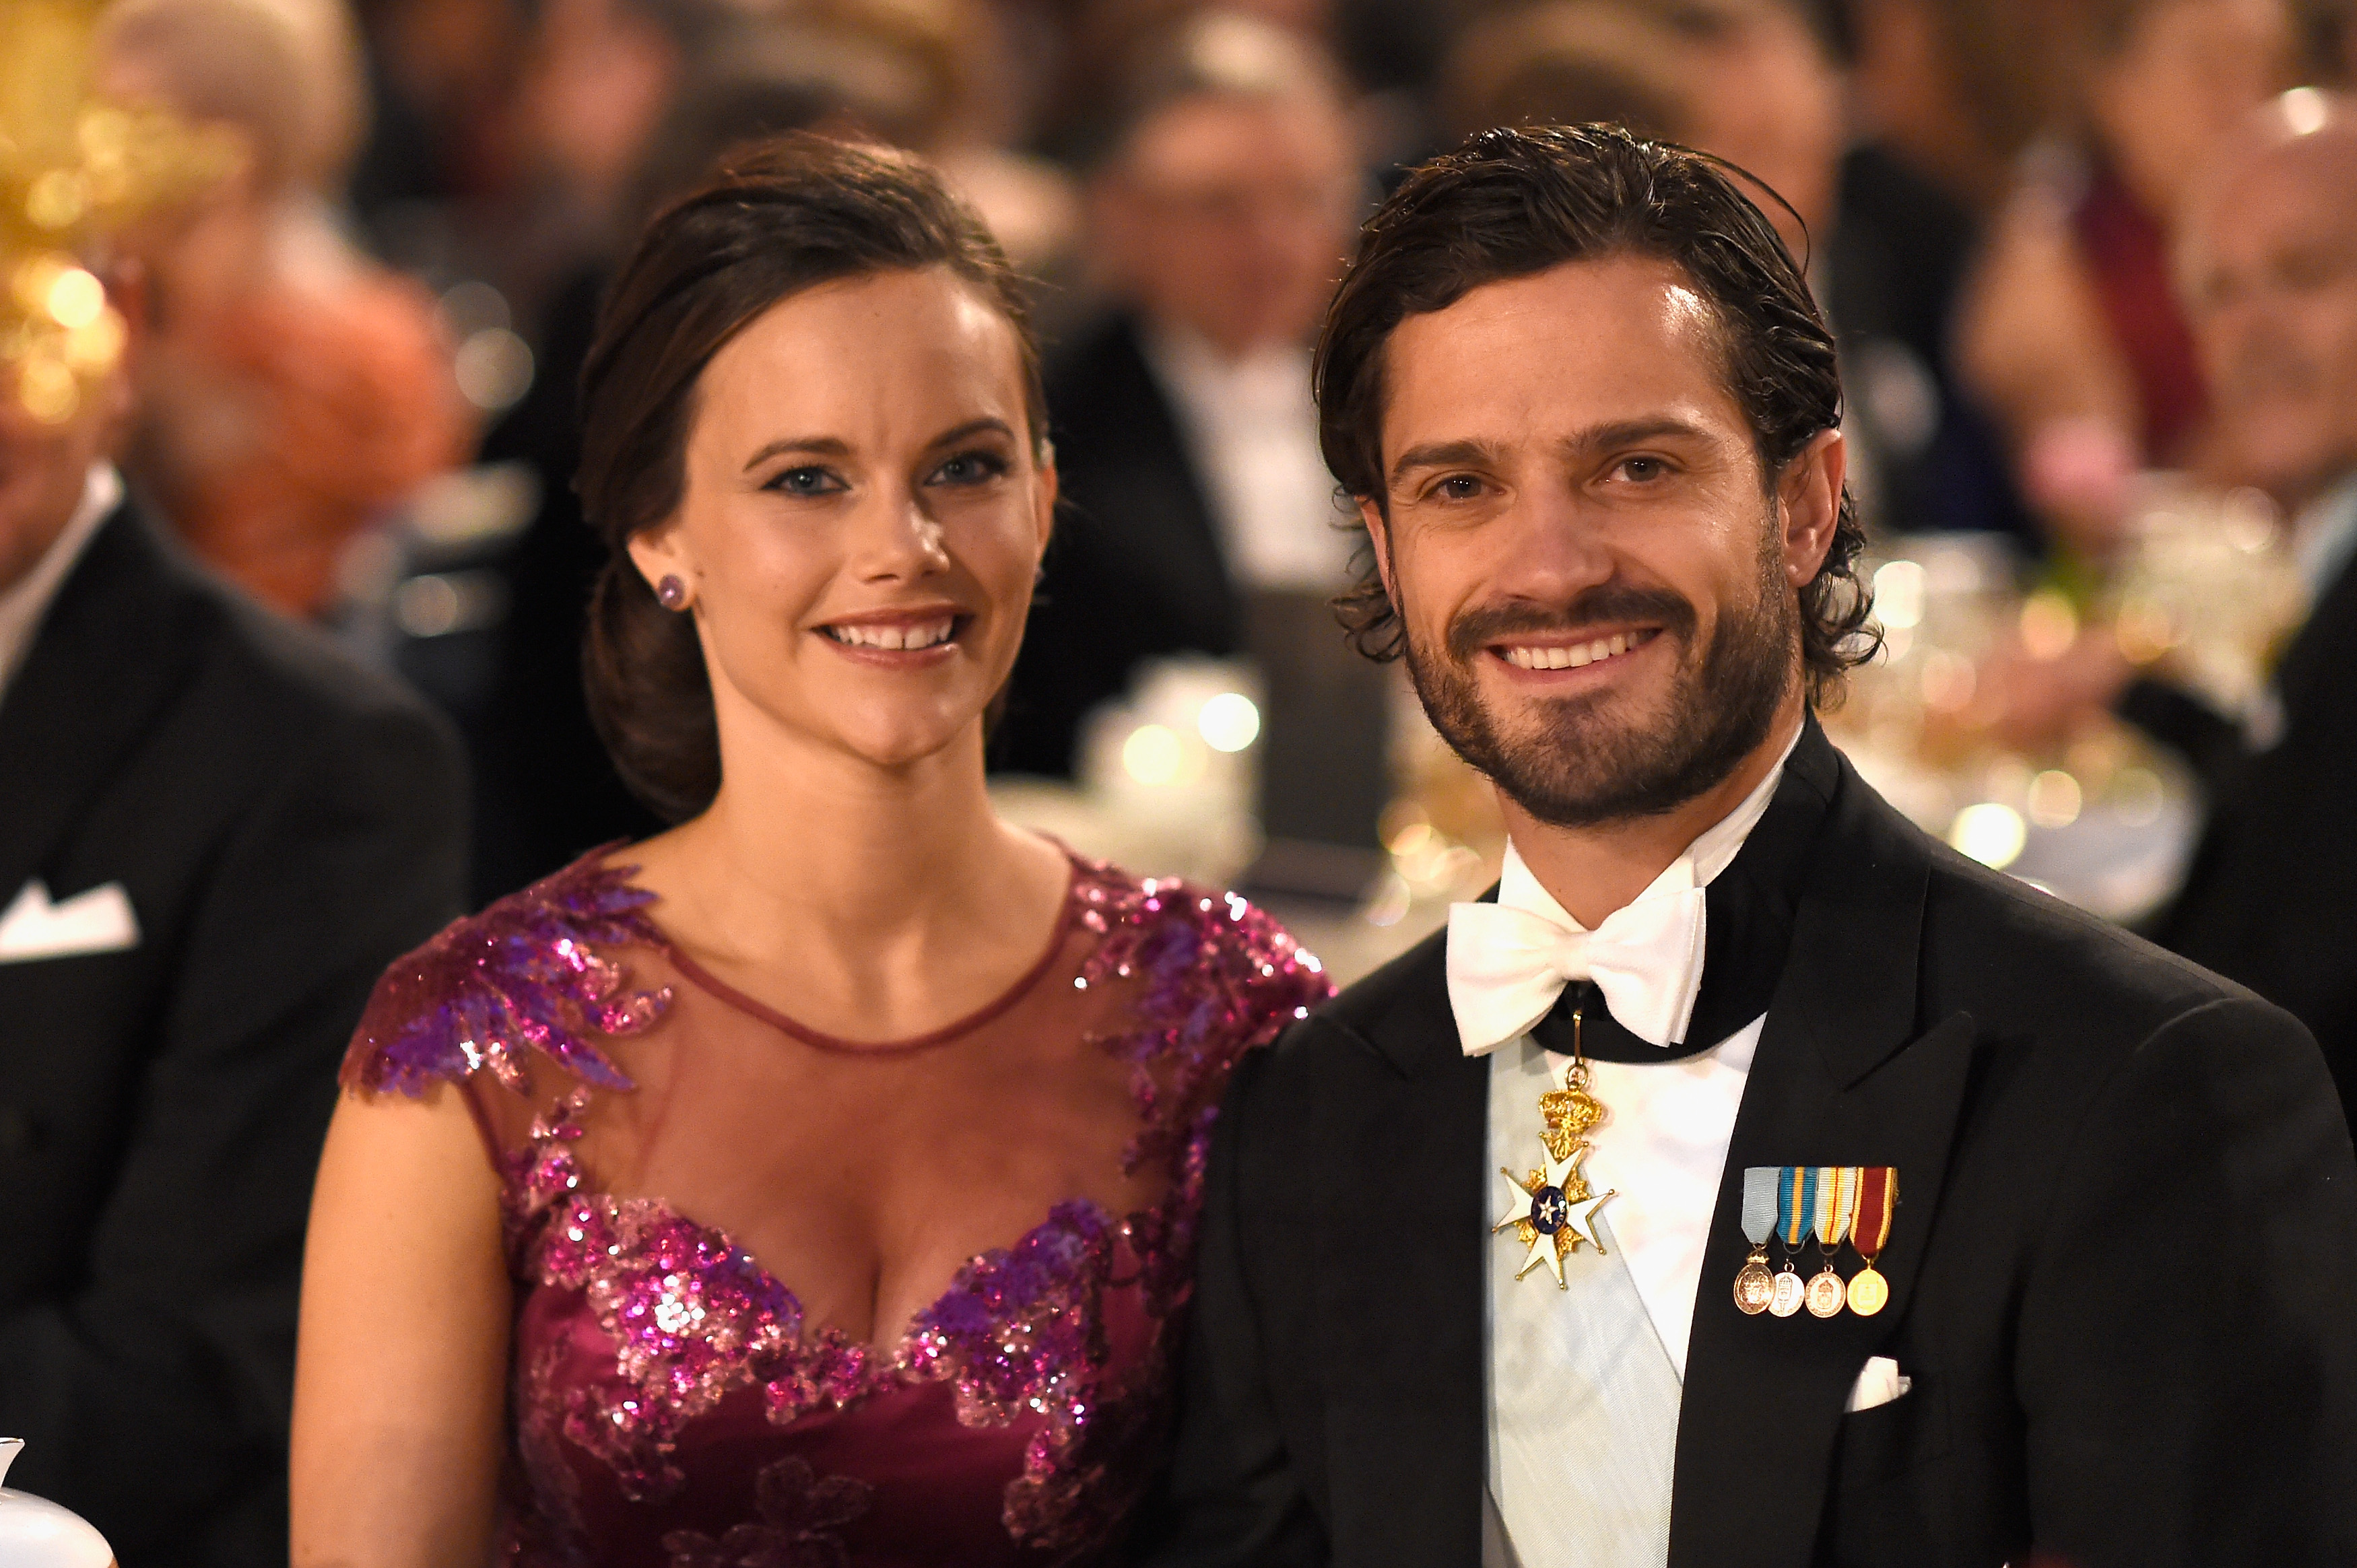 STOCKHOLM, SWEDEN - DECEMBER 10:  Sofia Hellqvist and Prince Carl Philip of Sweden attend the Nobel Prize Banquet 2014 at City Hall on December 10, 2014 in Stockholm, Sweden.  (Photo by Pascal Le Segretain/Getty Images)